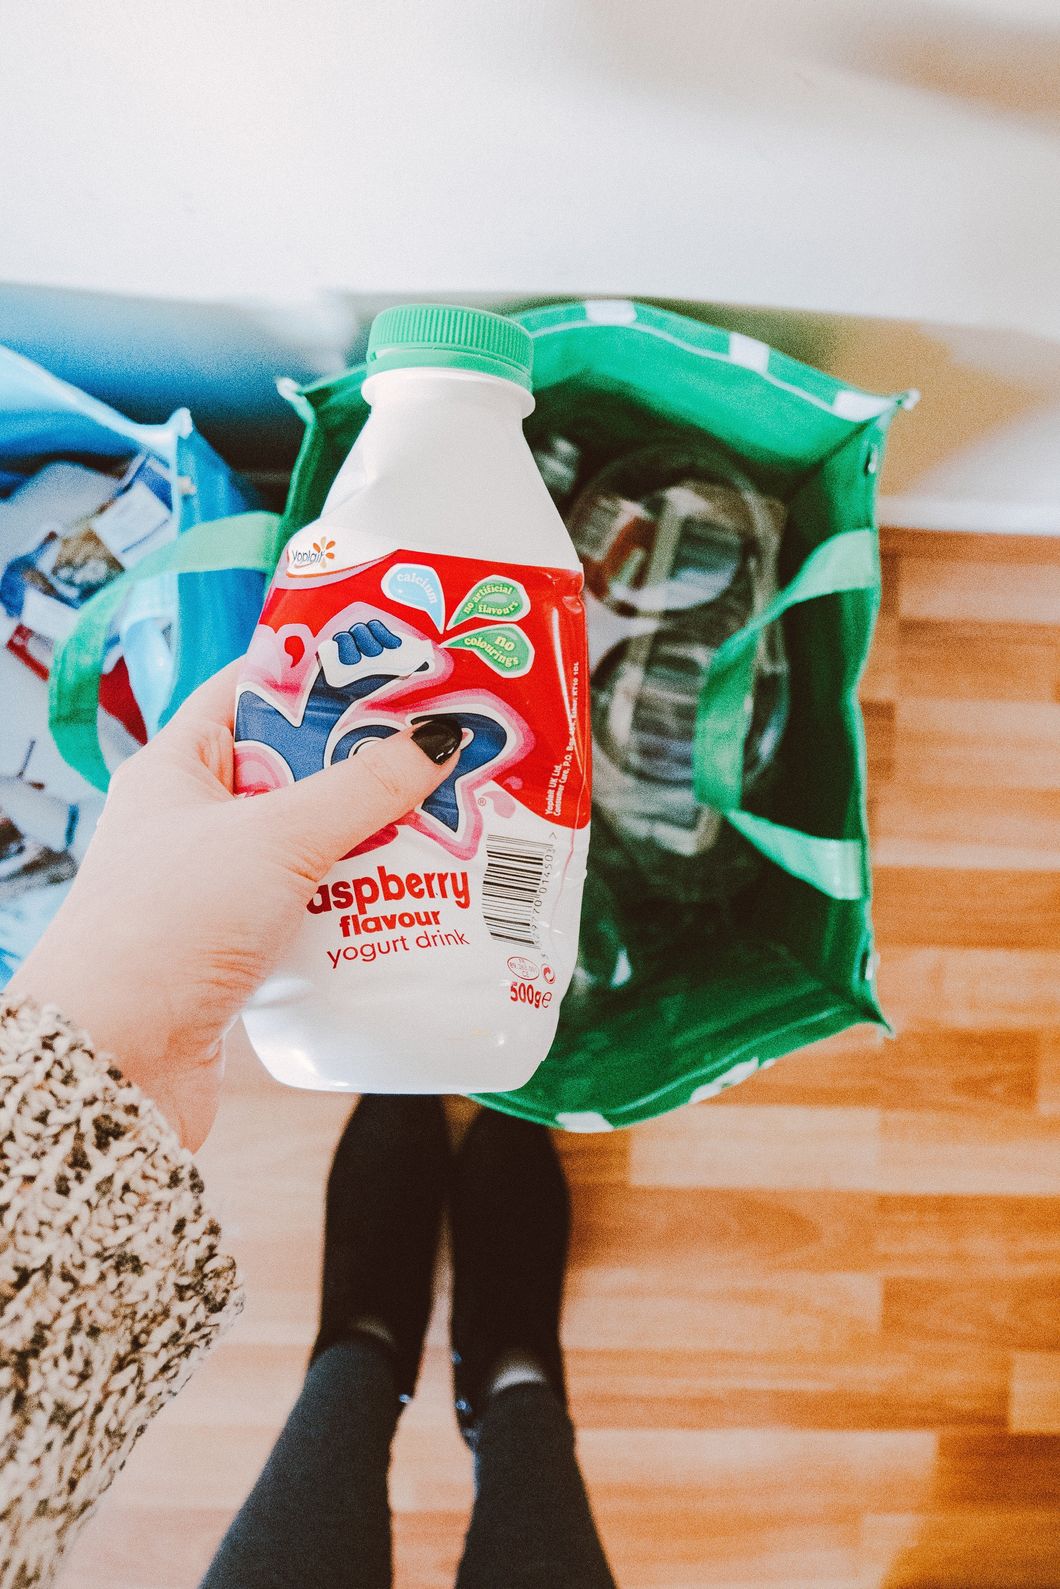 5 Everyday Items That Aren't Recyclable Like You Might Think